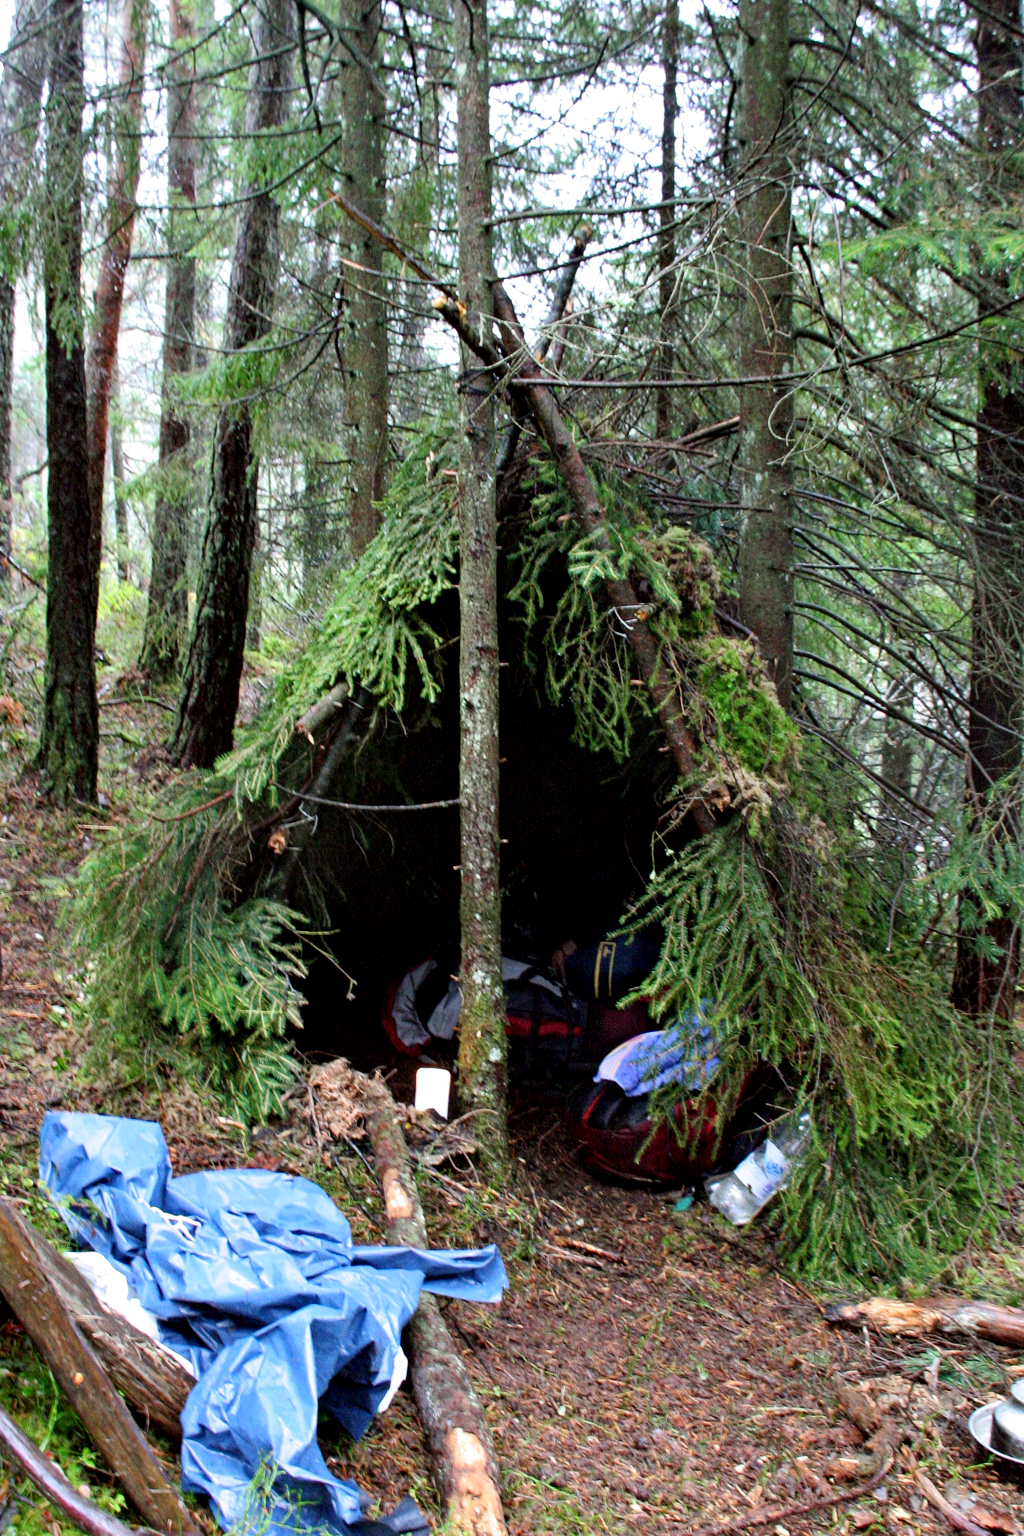 A tent created with sticks and branches